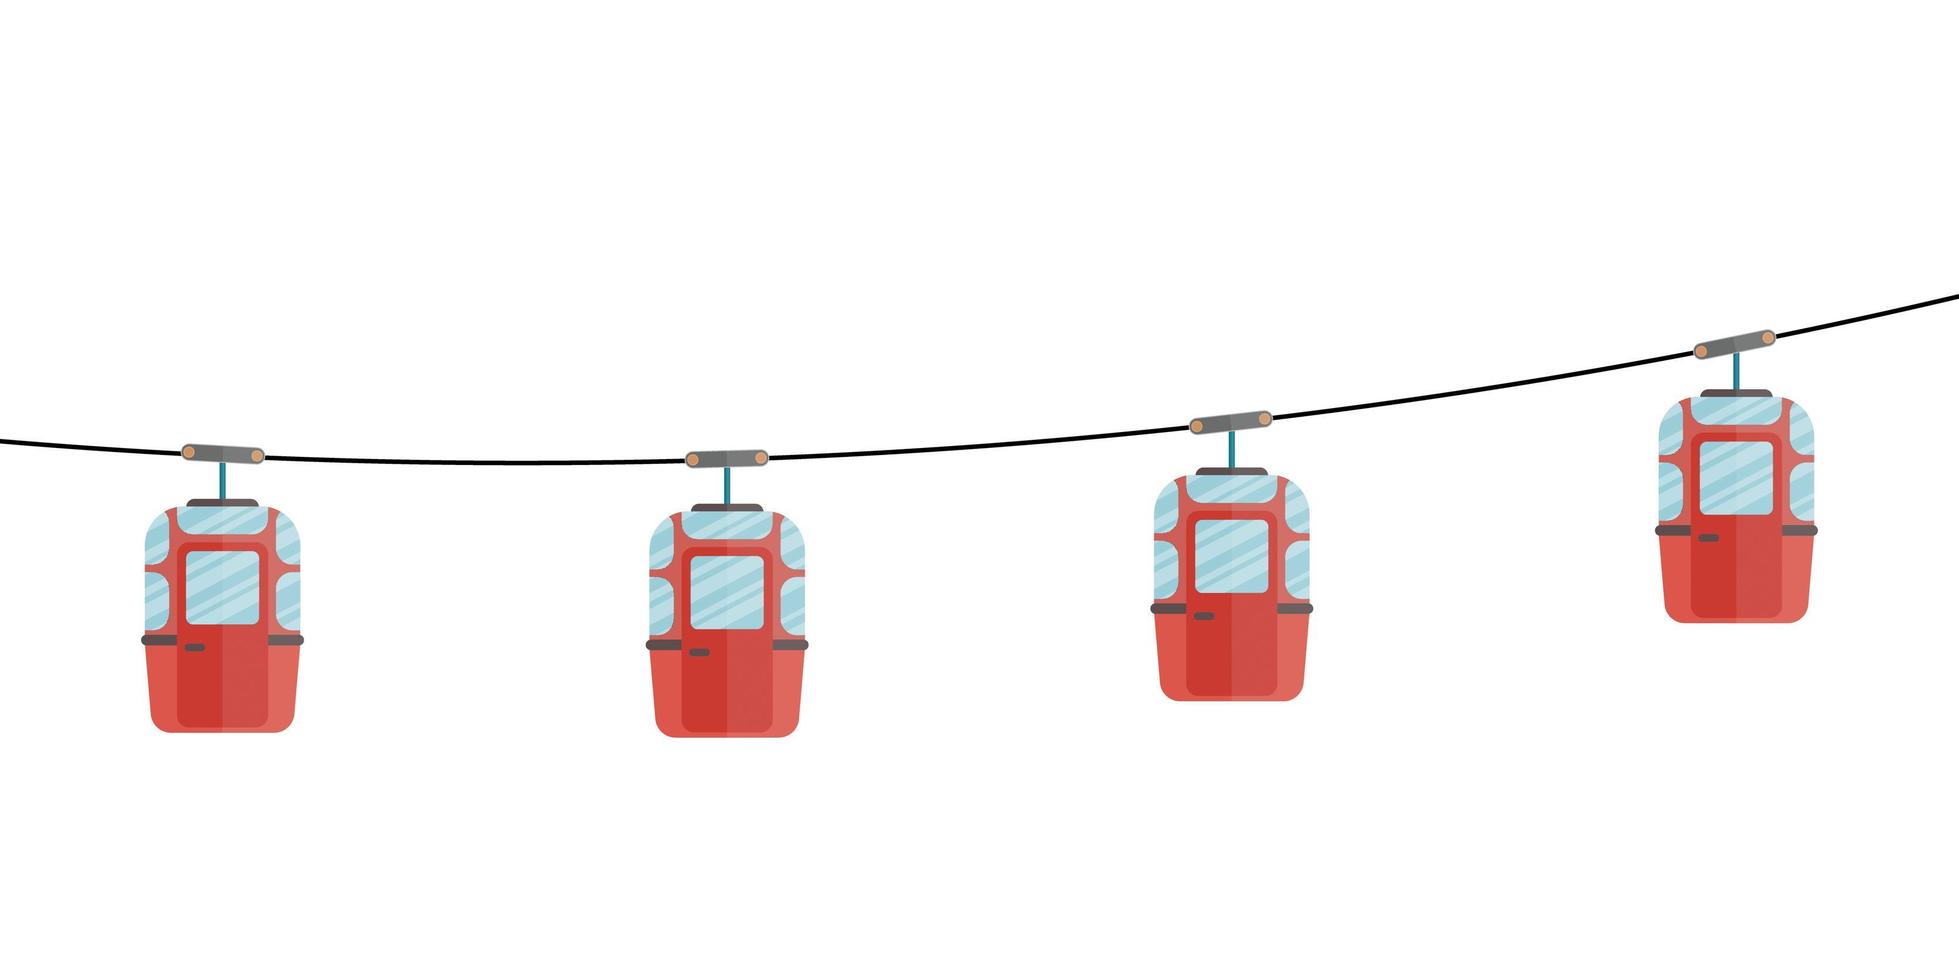 Cable-car on rope-way cartoon drawing over white background vector